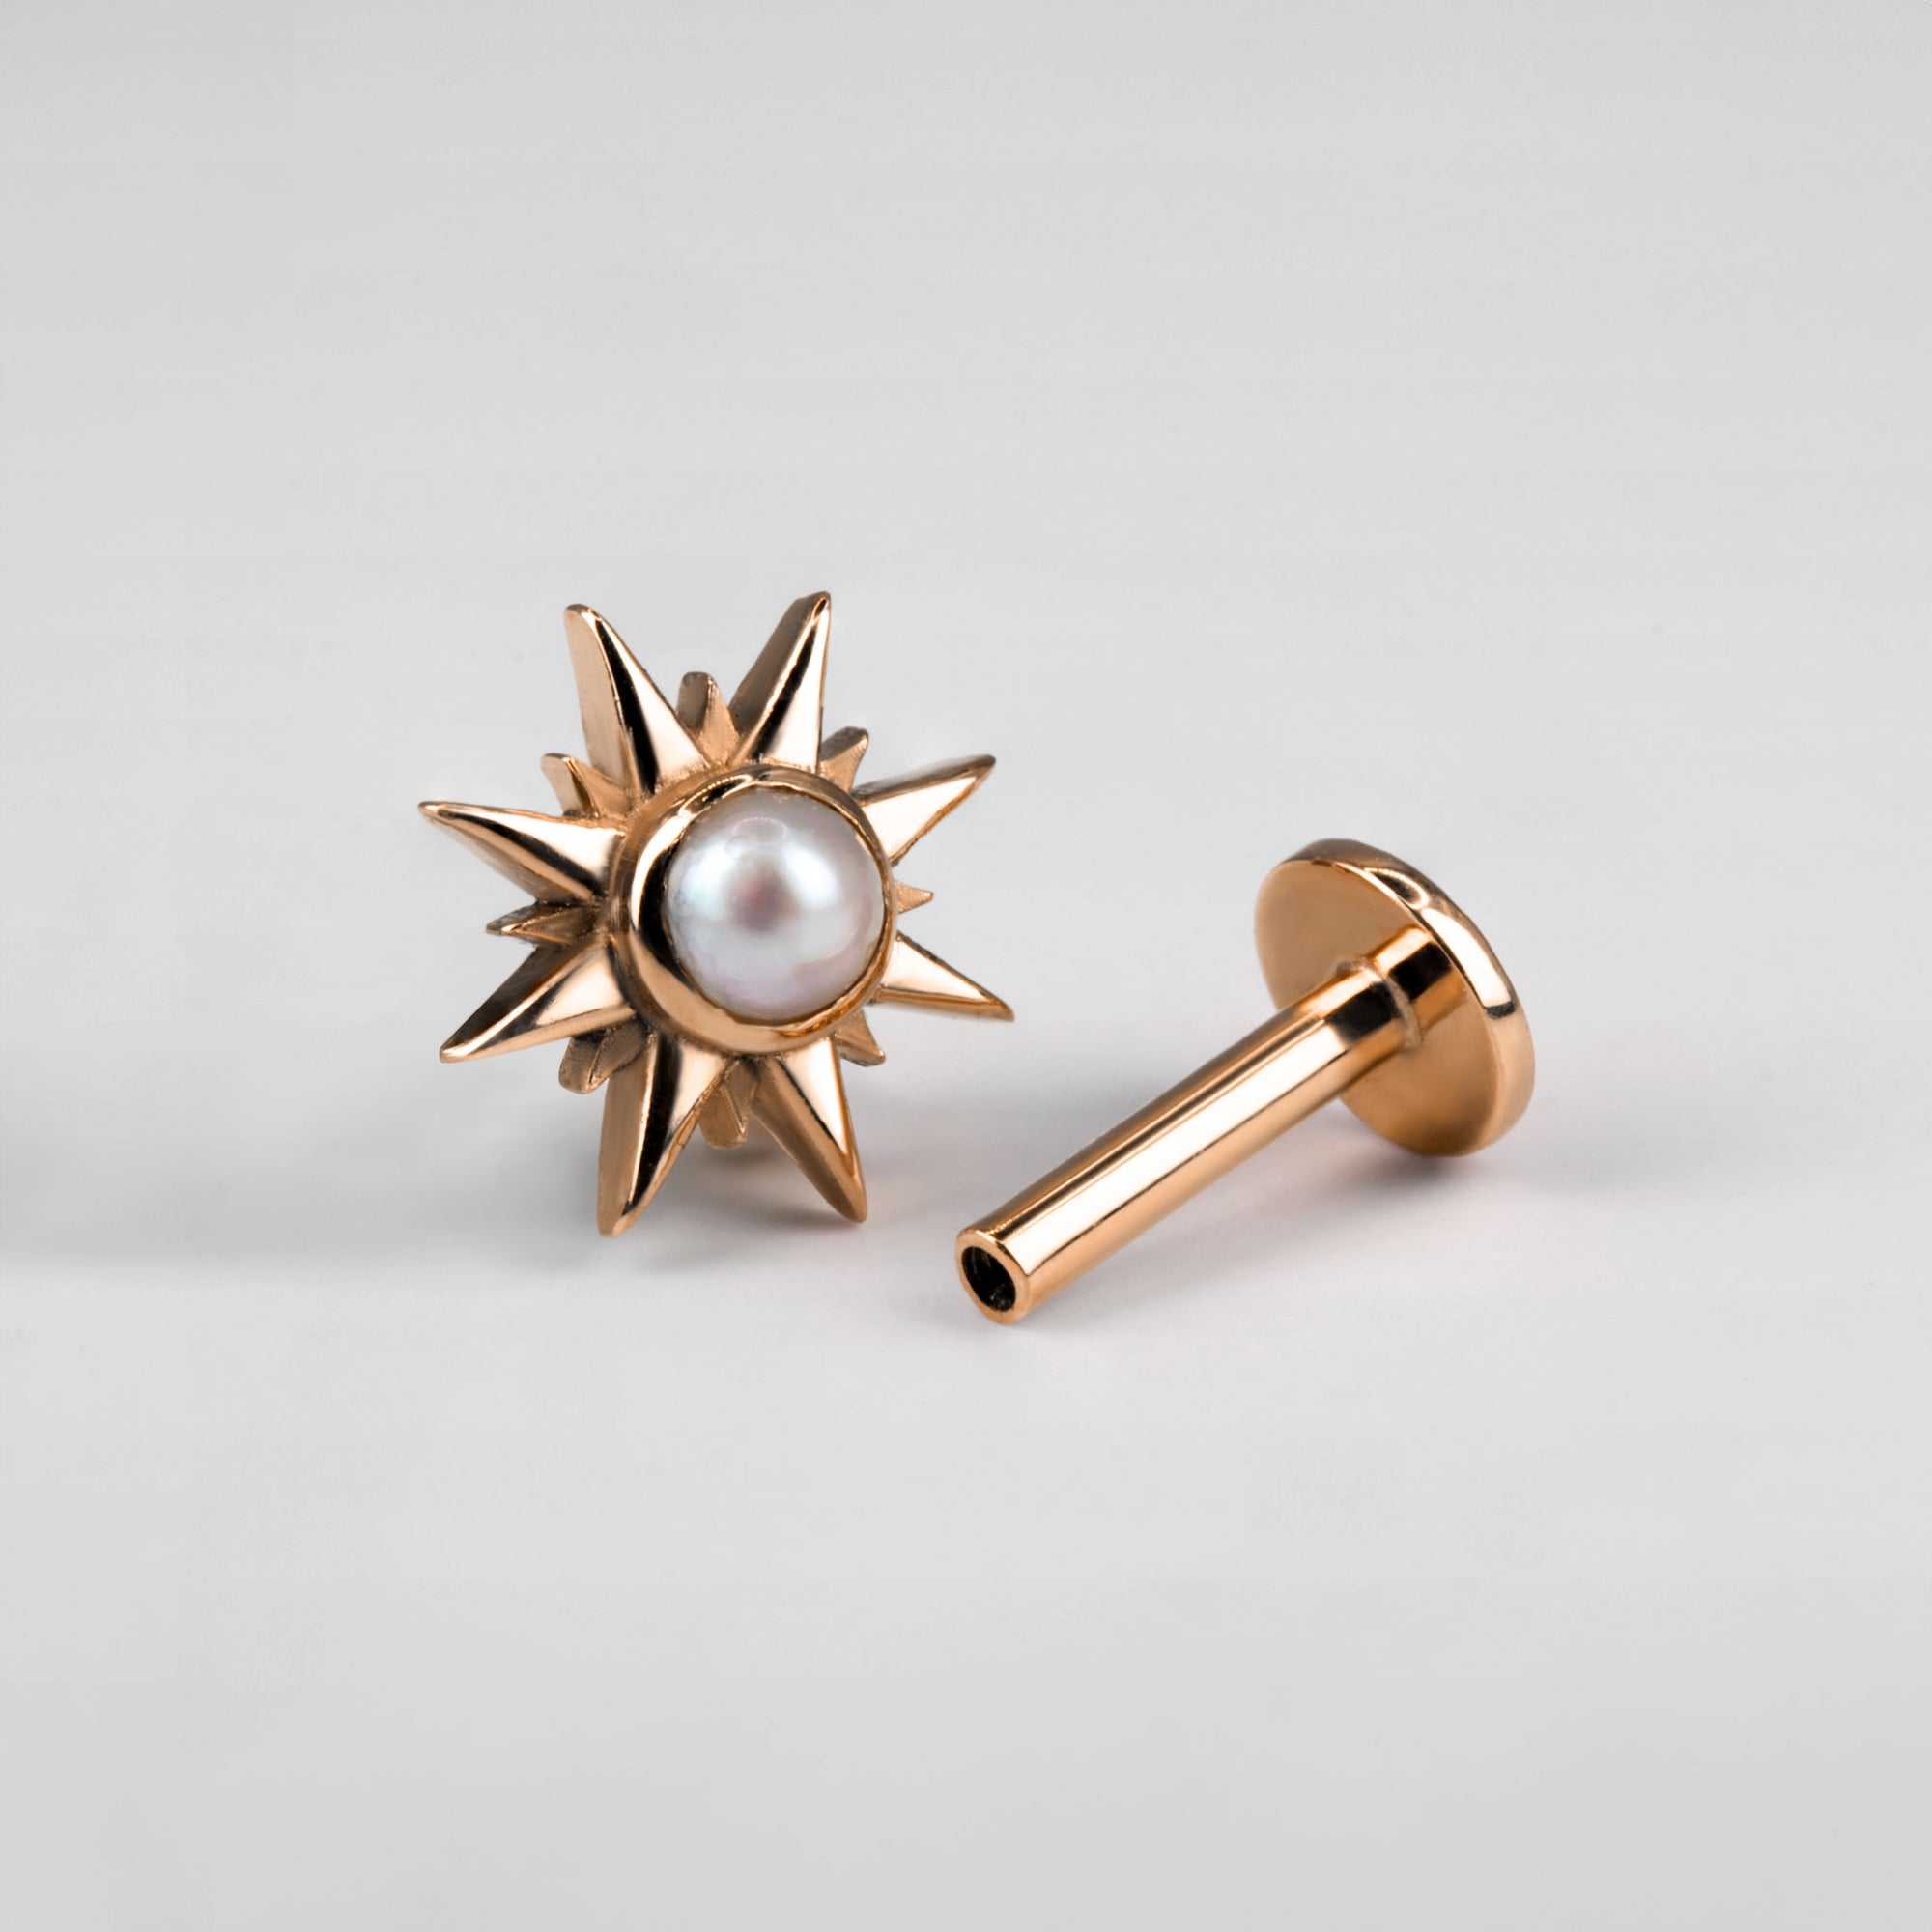 18k rose gold star-shaped ear labret piercing stud with pearl